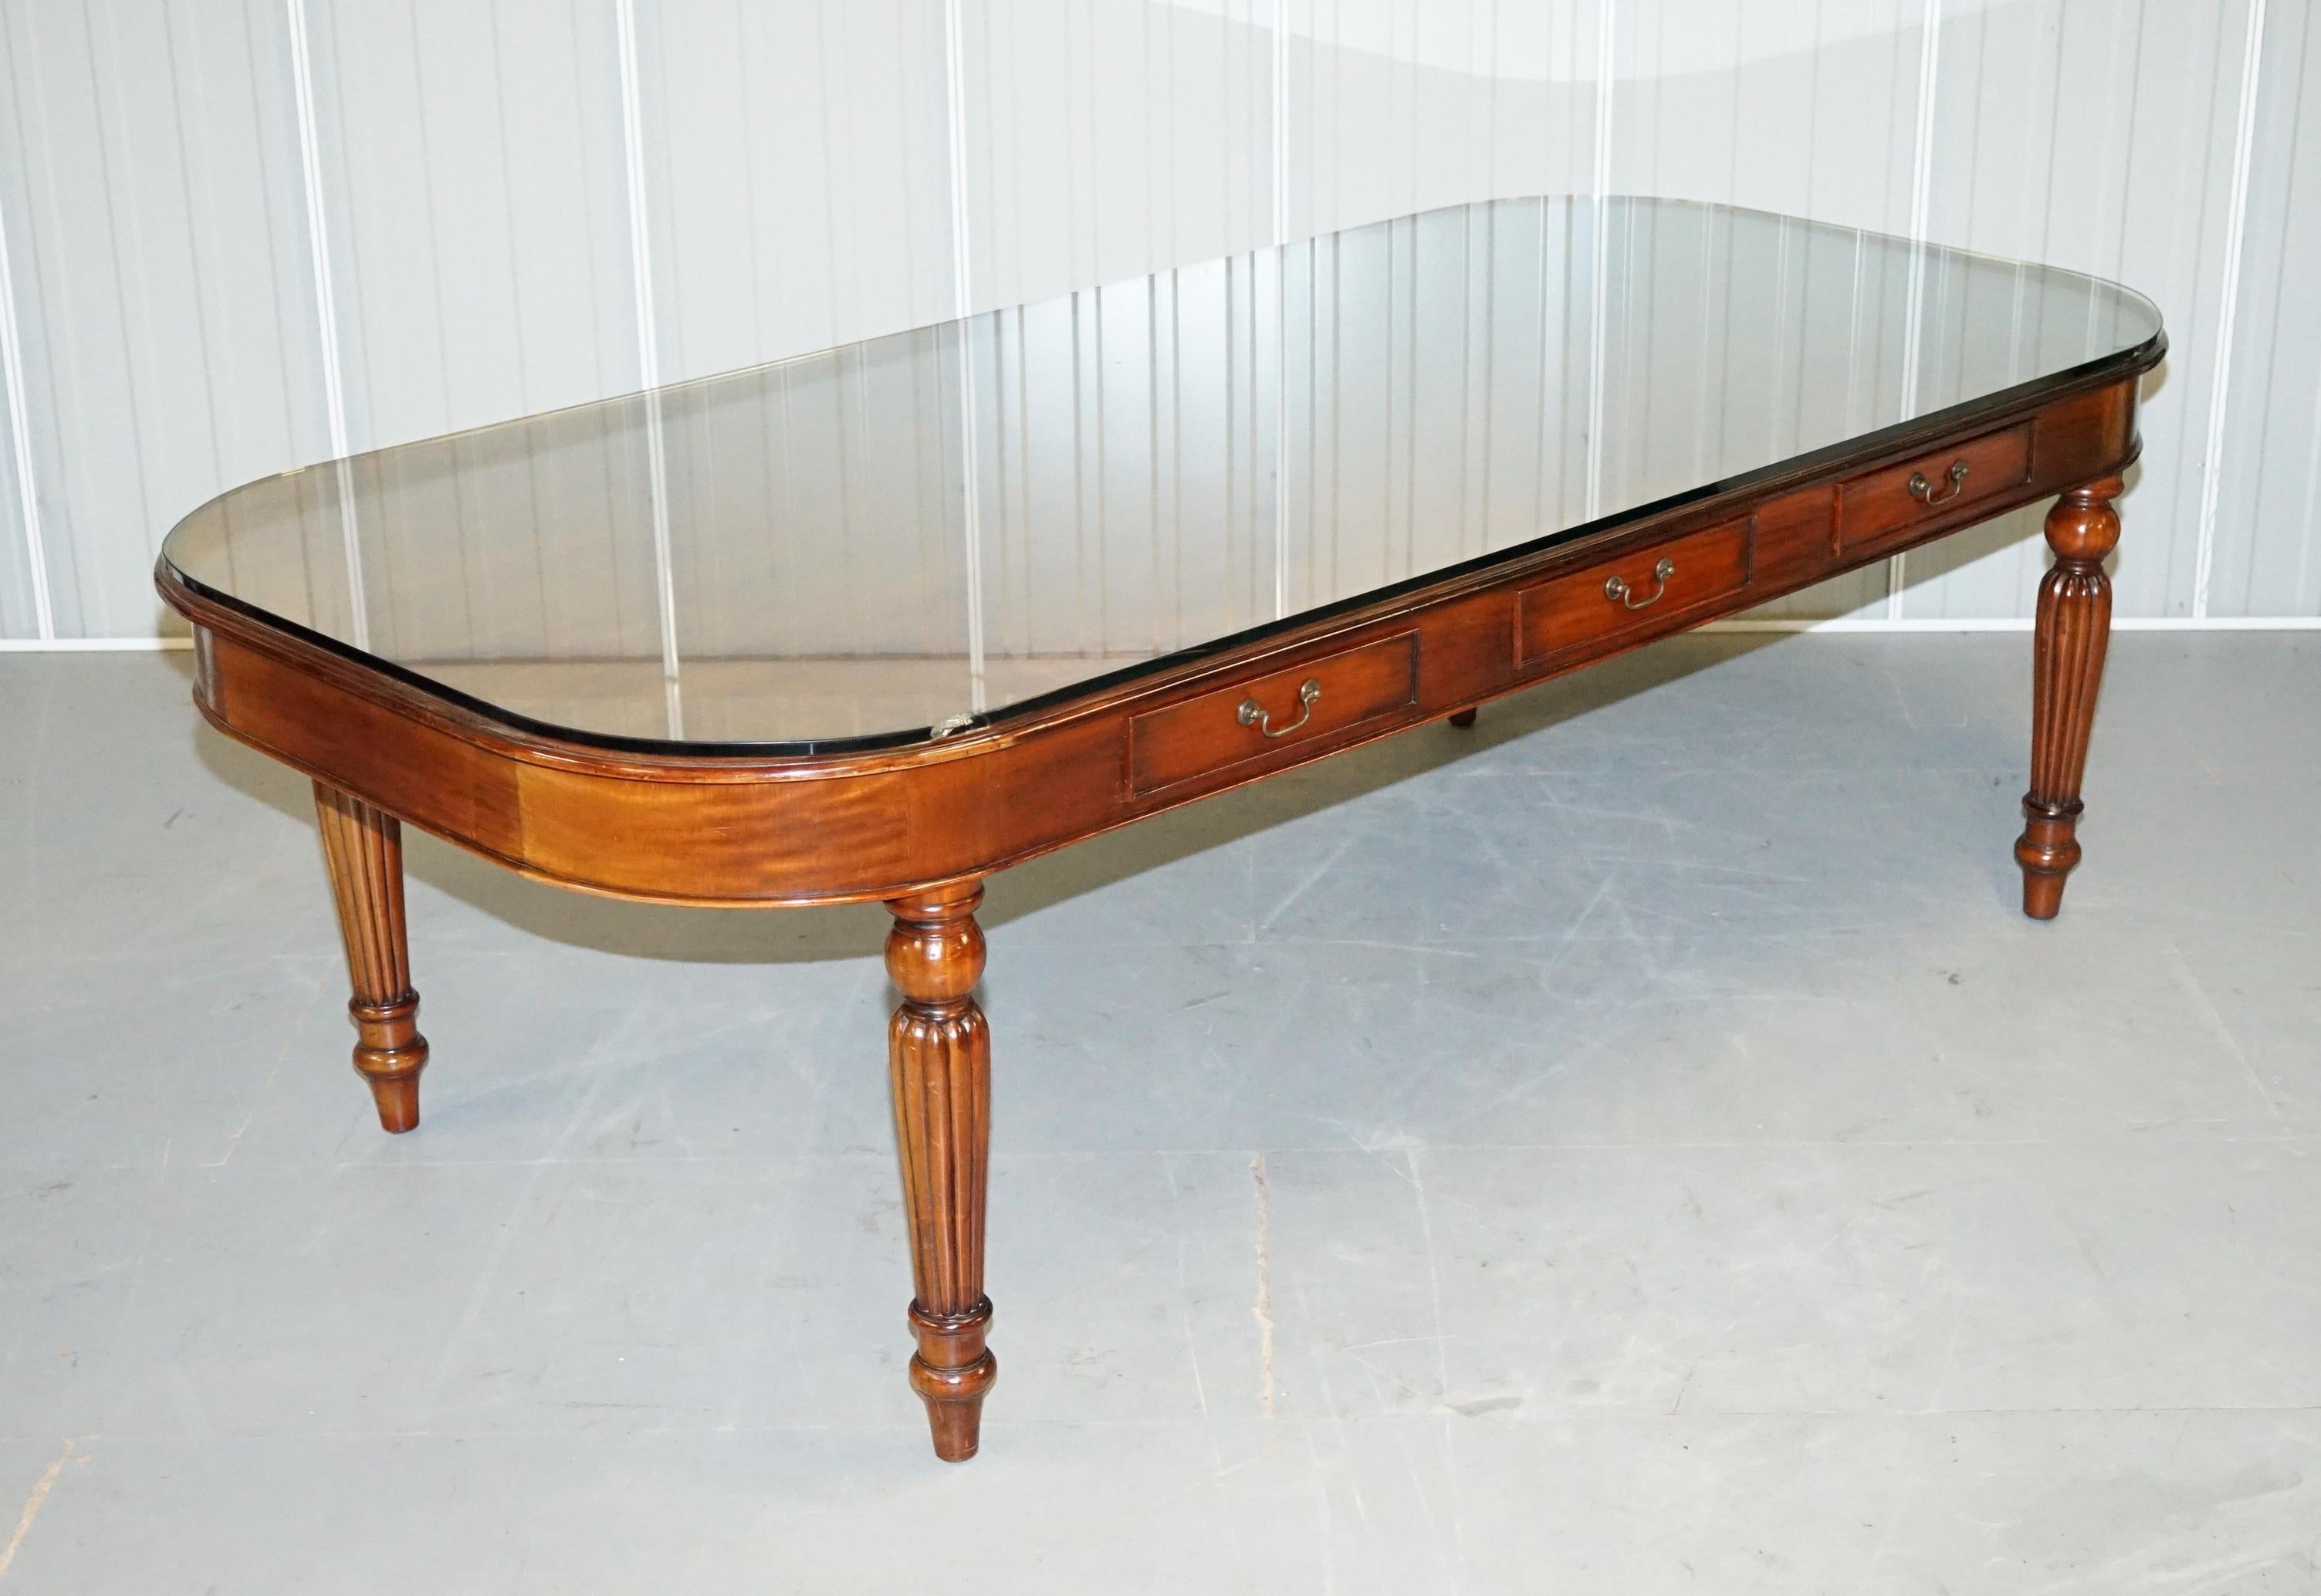 We are delighted to offer for sale this large 10-12 person six drawer Regency style mahogany dining table with thick glass top

A very well made and quite grand dining table, it comes with an exceptionally thick glass top, the legs to the table